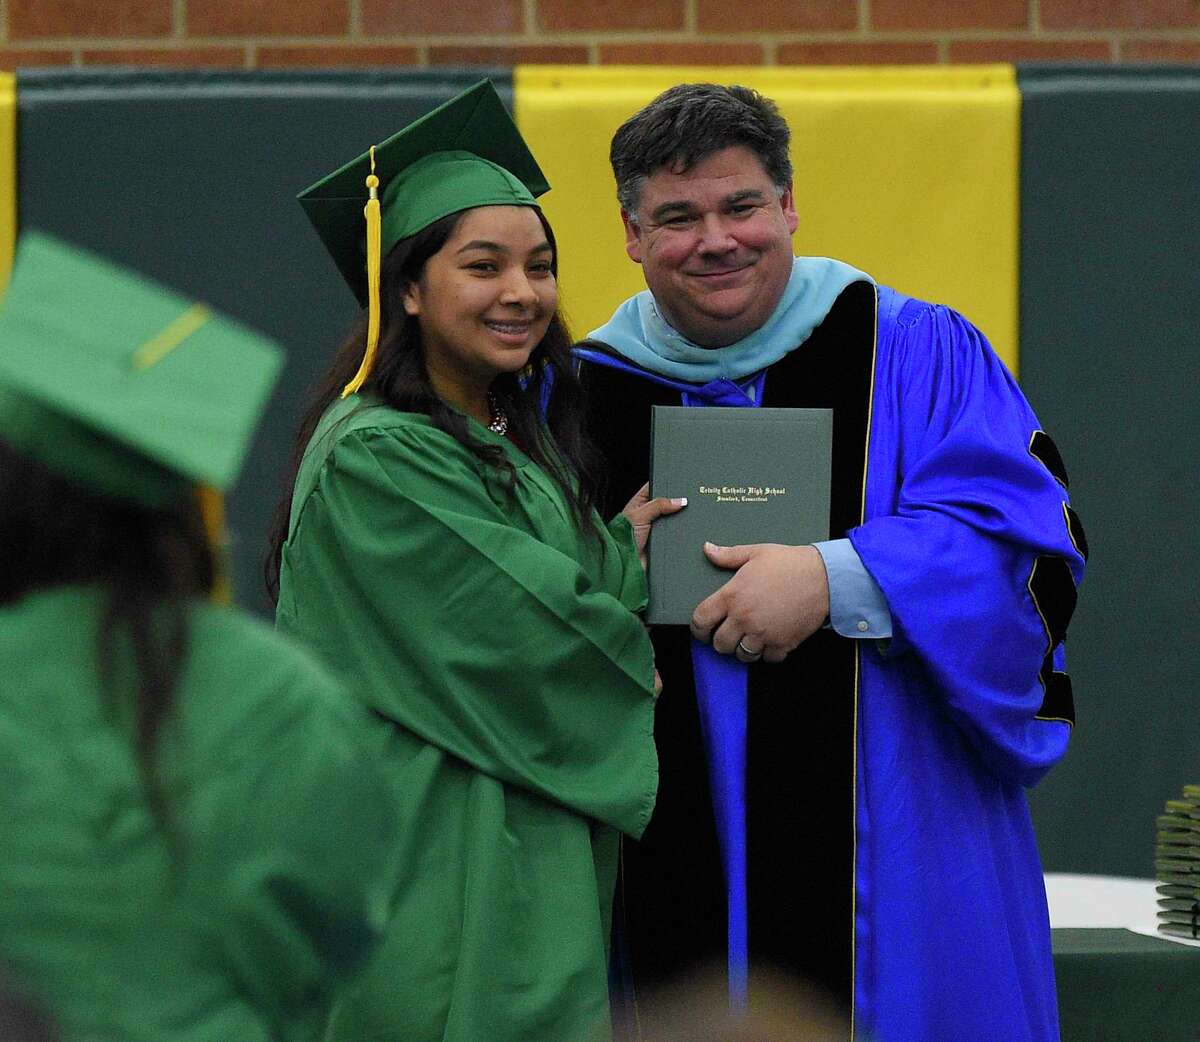 Trinity Catholic High School Class of 2019 commencement exercises on May 30, 2019 in Stamford, Connecticut.